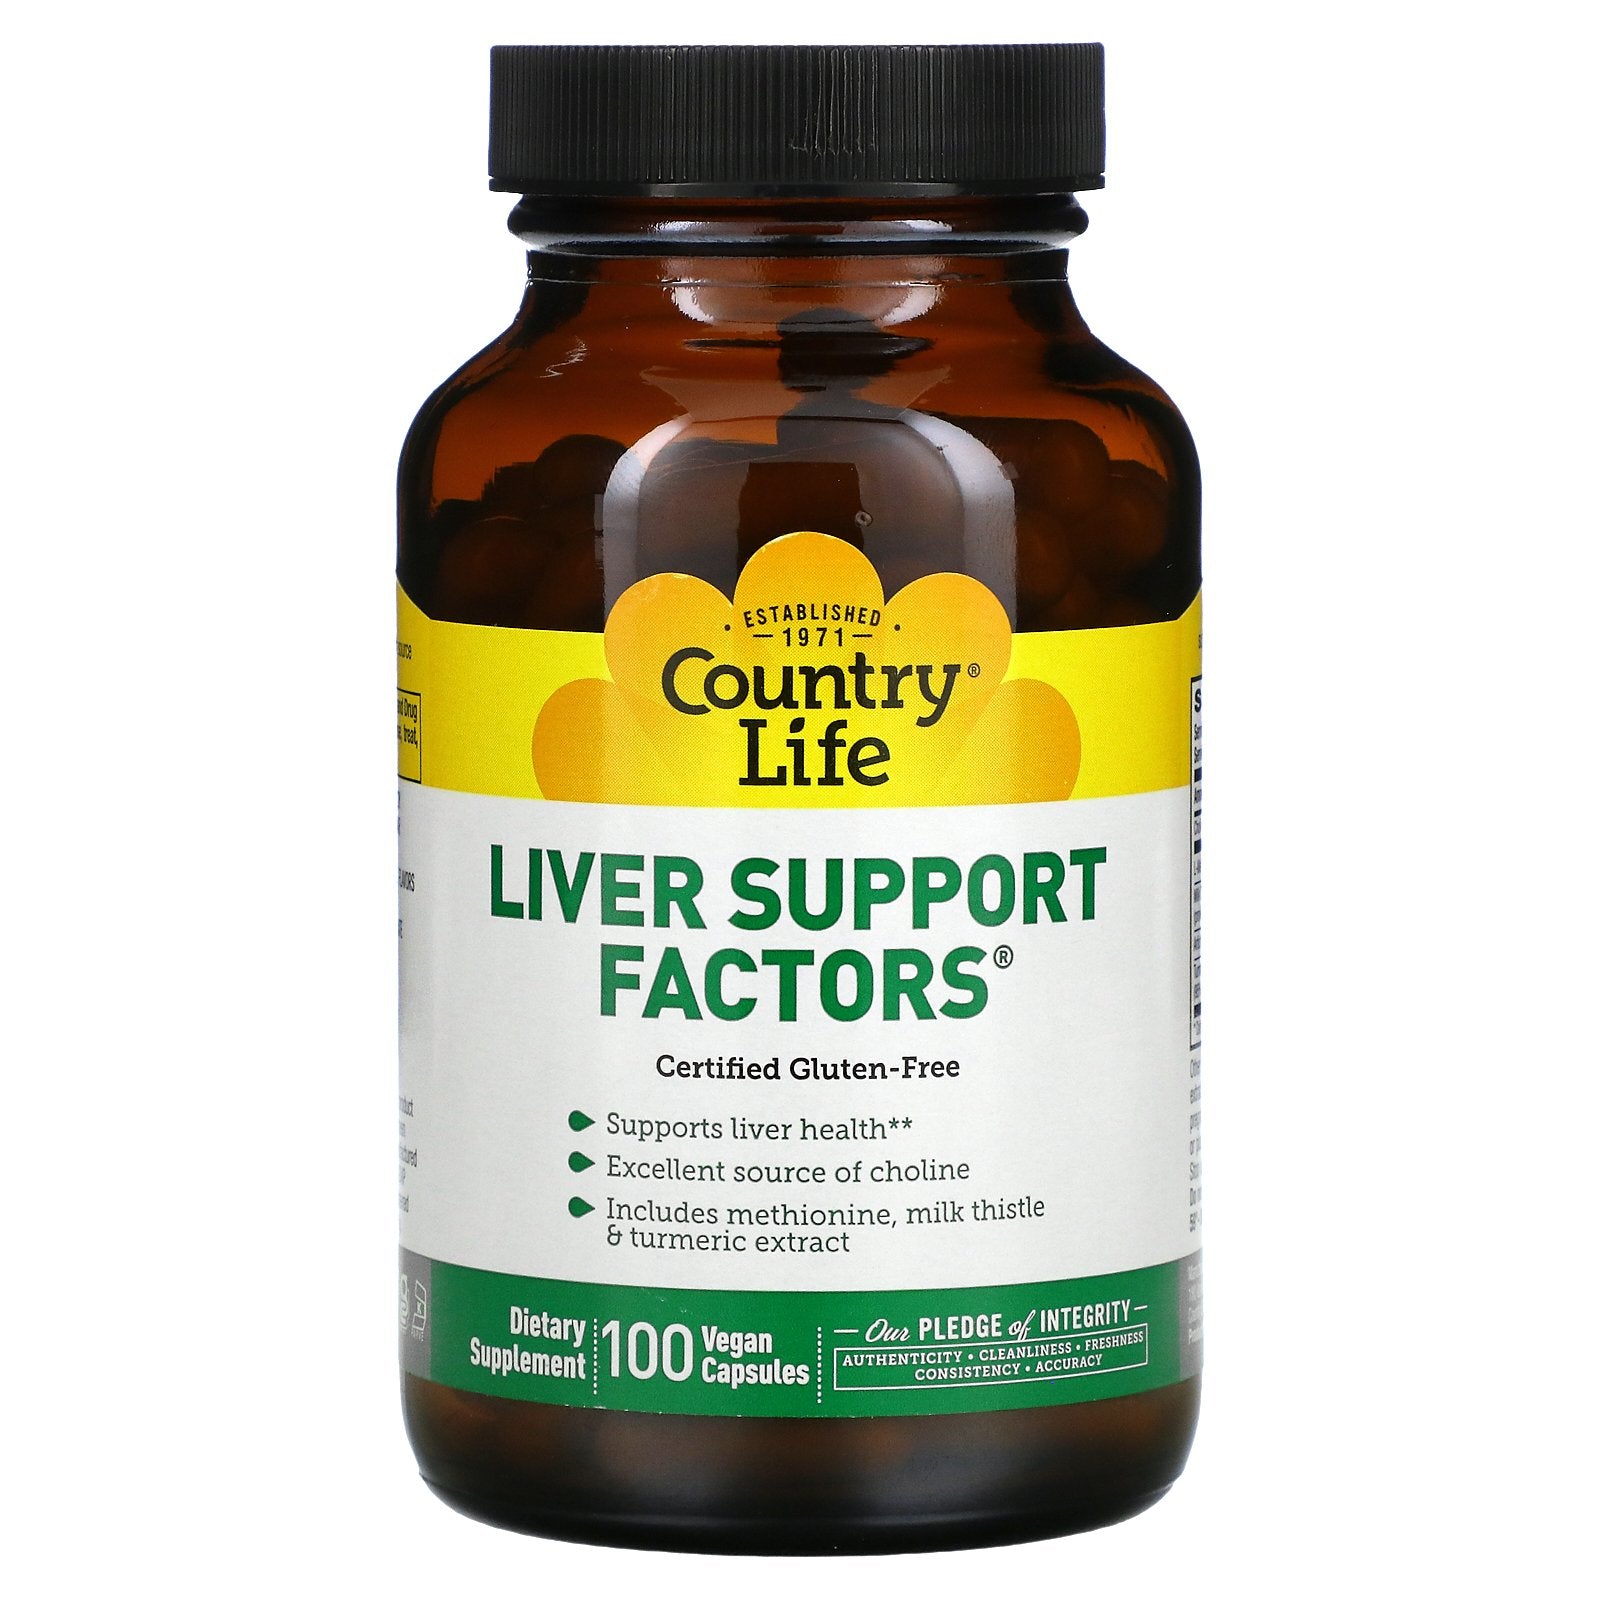 Country Life, Liver Support Factors Vegan Capsules